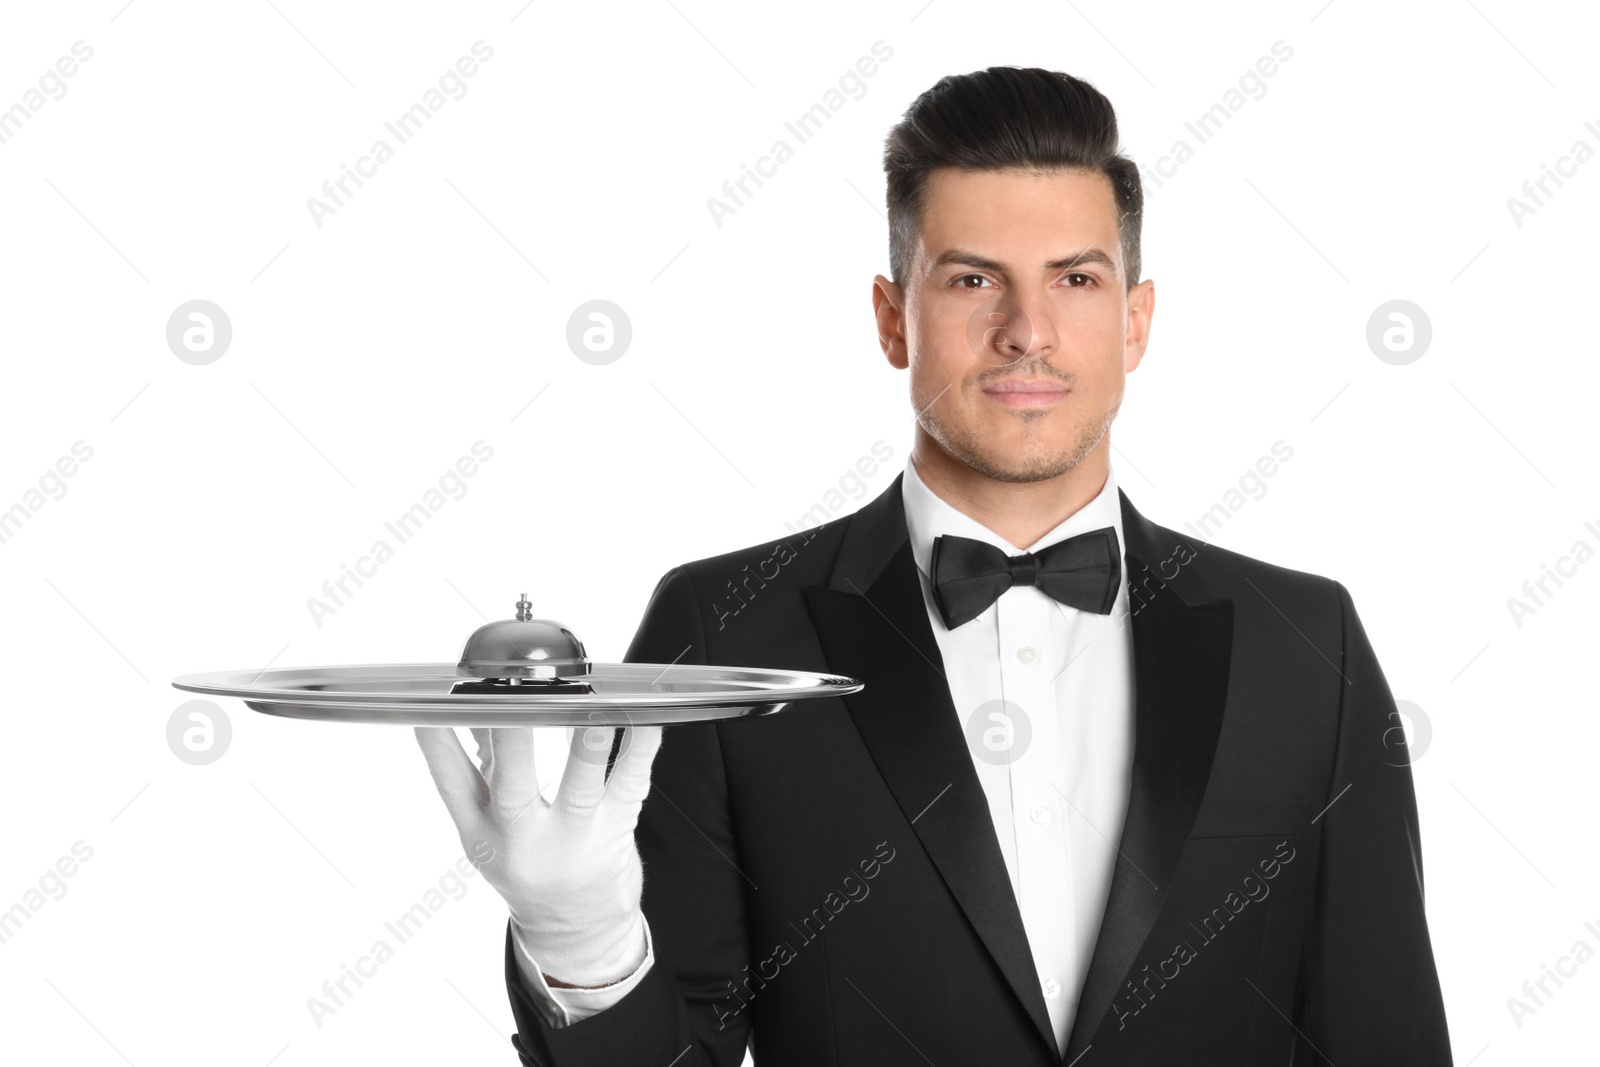 Photo of Butler holding metal tray with service bell on white background